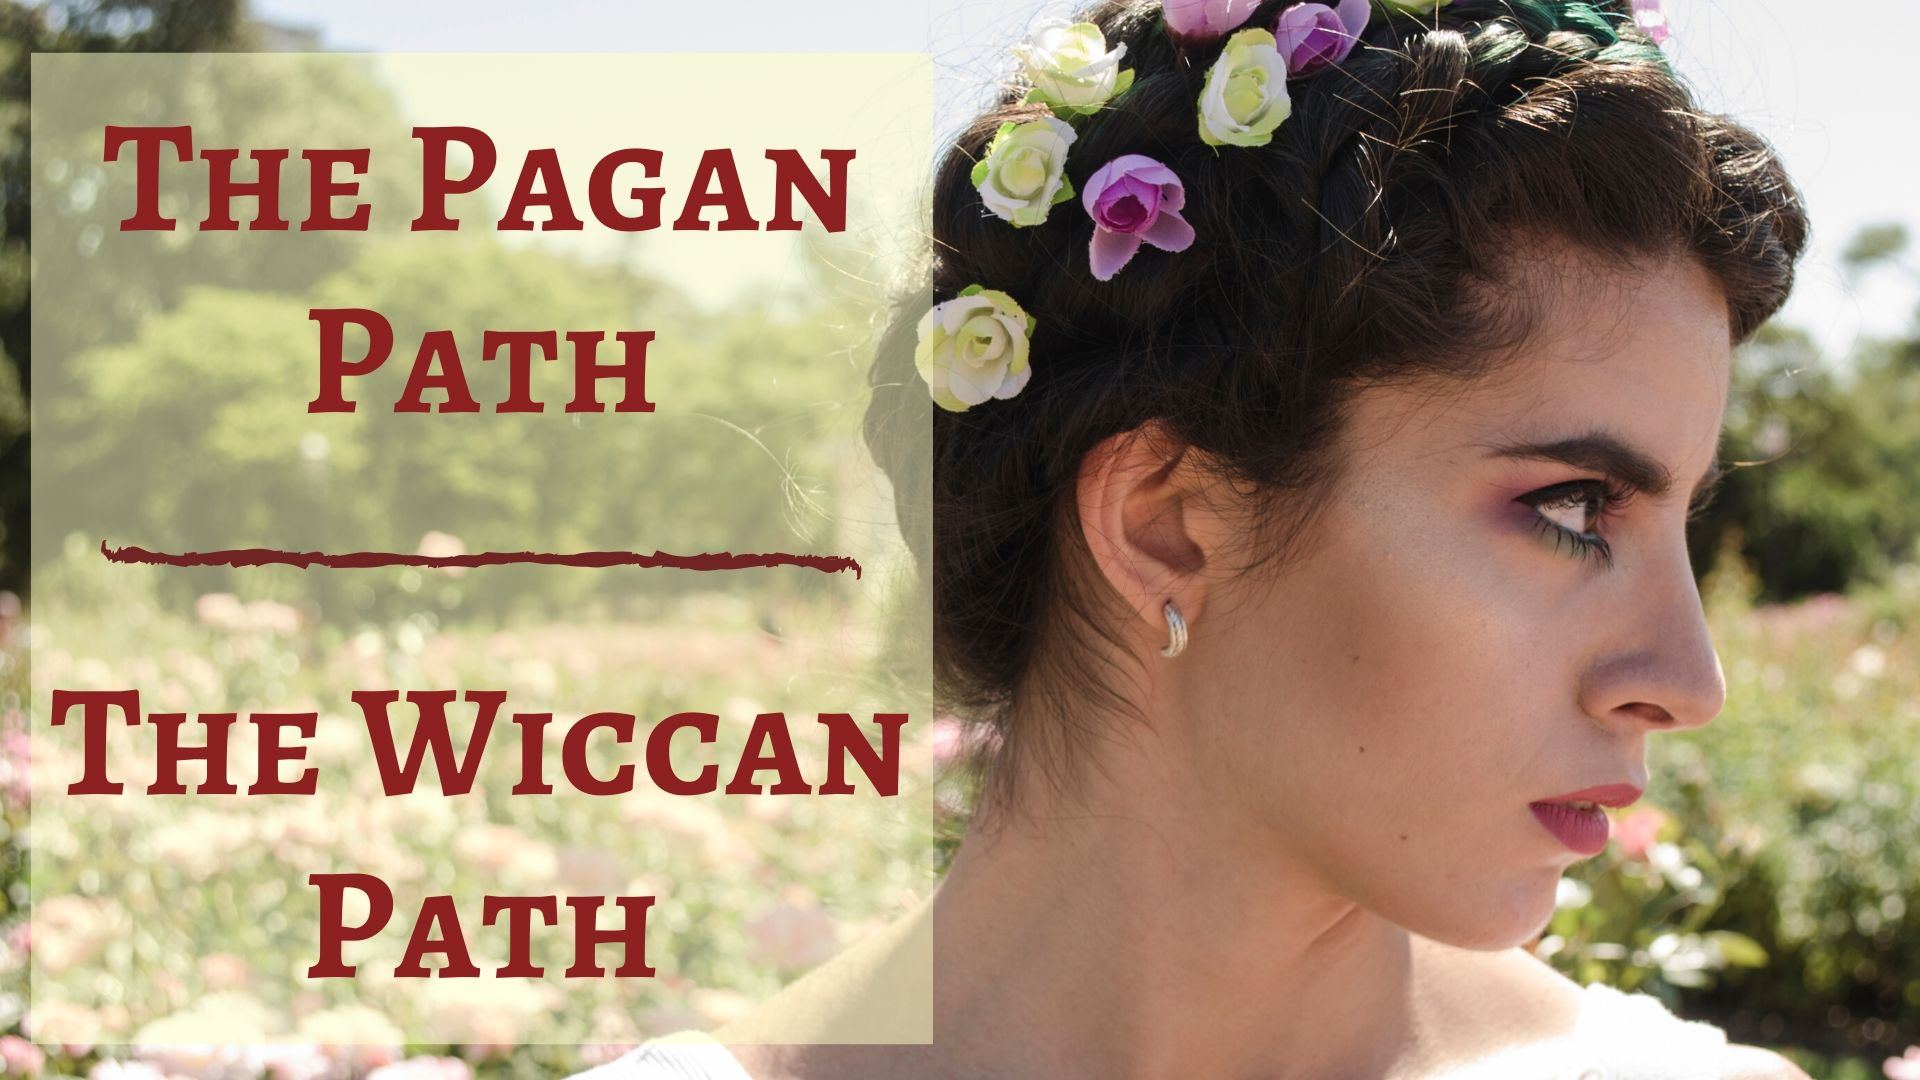 The Pagan Path – The Wiccan Path